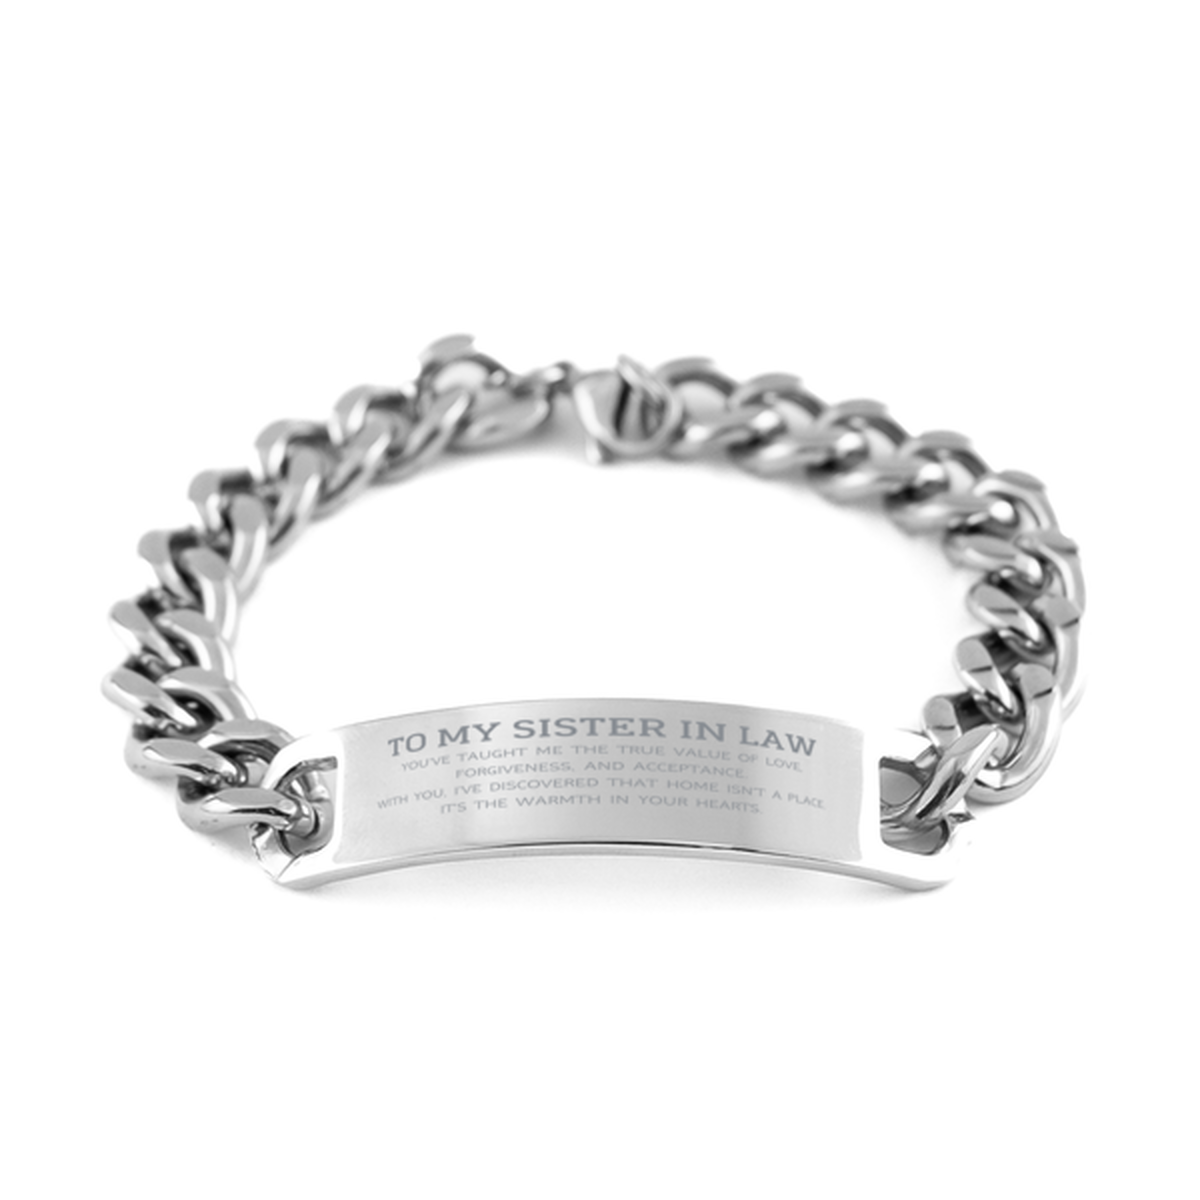 To My Sister In Law Gifts, You've taught me the true value of love, Thank You Gifts For Sister In Law, Birthday Cuban Chain Stainless Steel Bracelet For Sister In Law